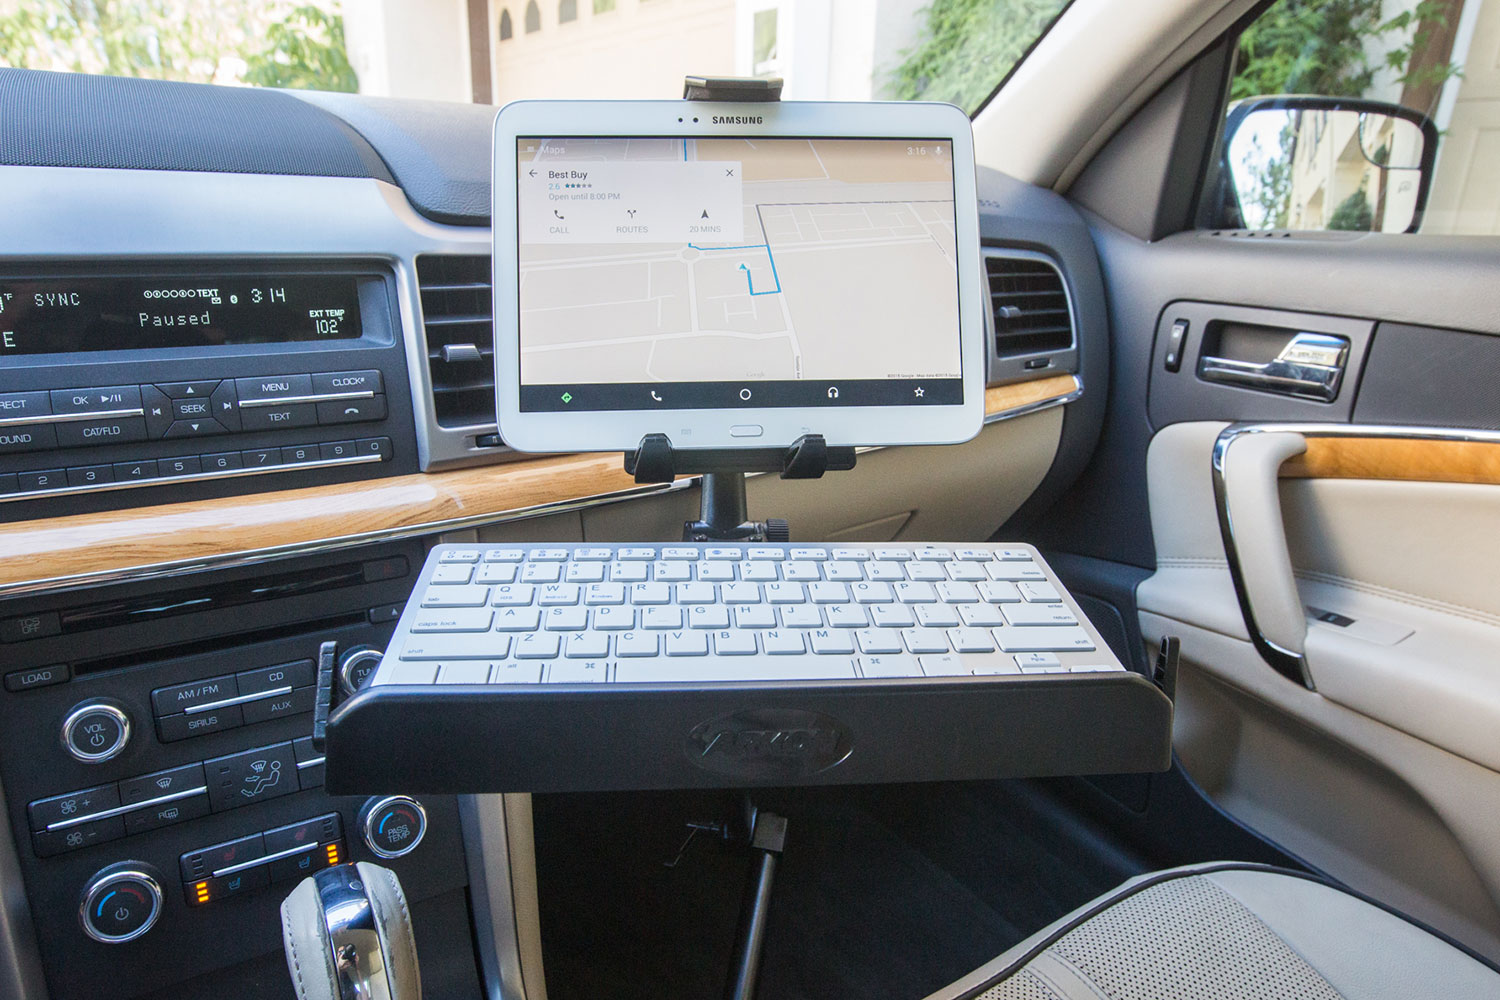 arkon automotive phone and tablet mounts hands on review tcmhd001 keyboard tray